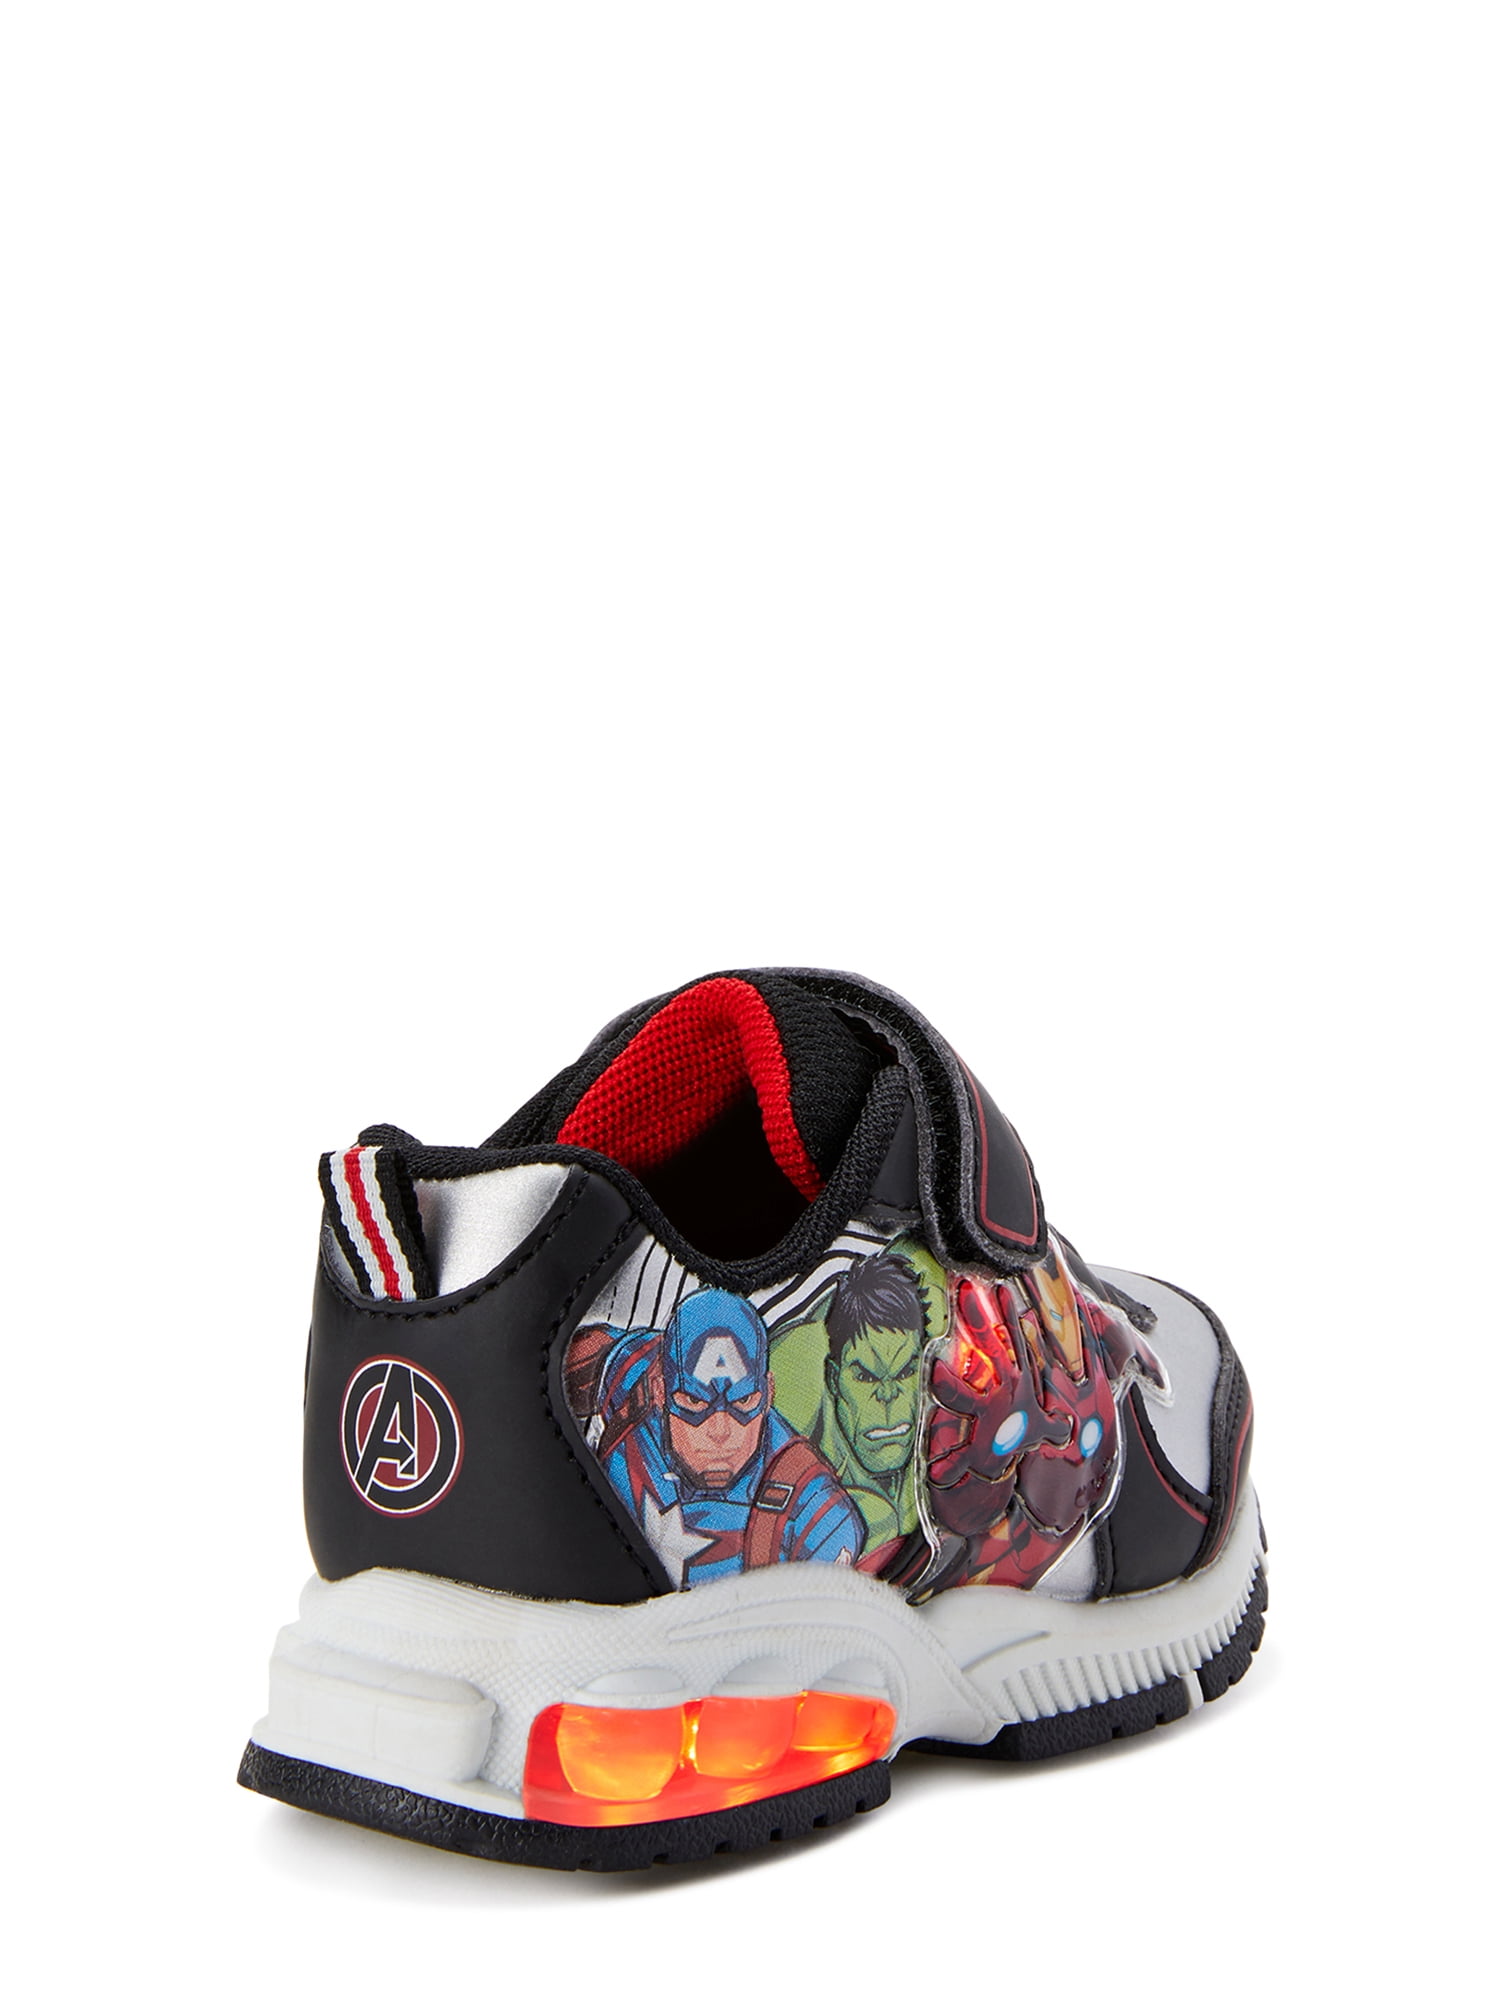 New Marvel Avengers Toddler Boy's Shoes Blue/Character #83240 g19a a 